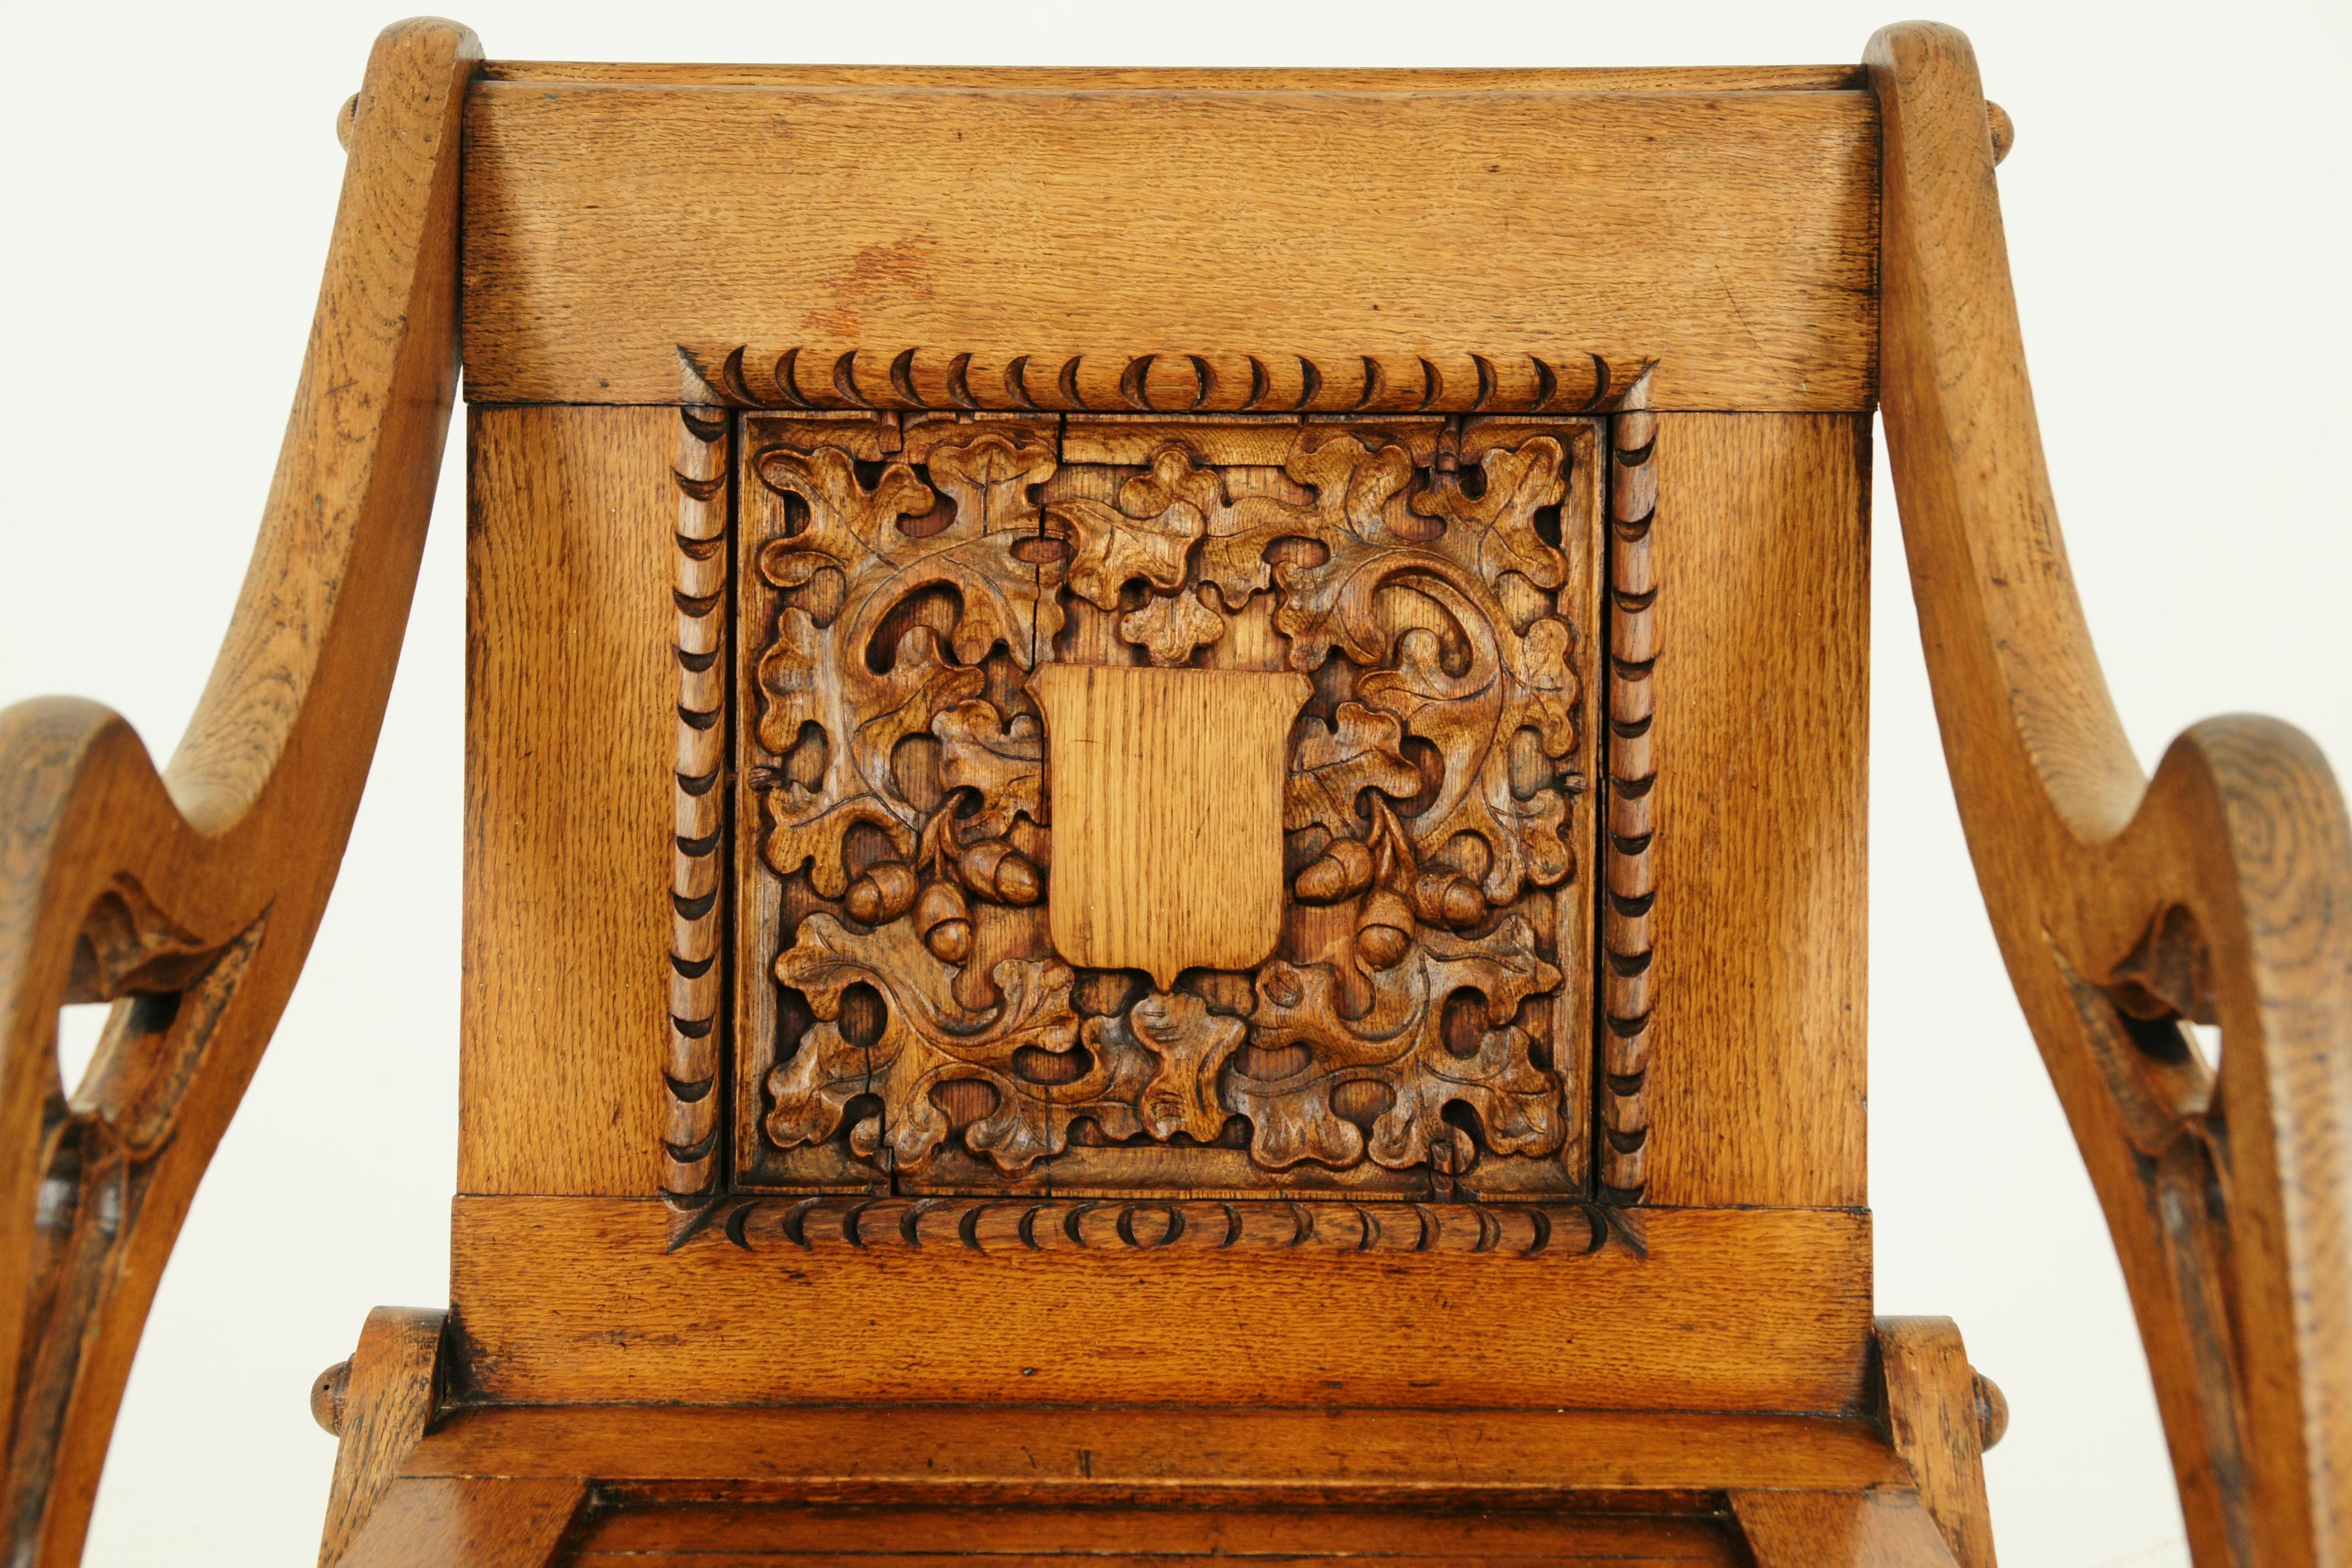 Antique glastonbury chair, Arts & Crafts chair, solid oak chair, scotland 1900, antique furniture, B1538

Scotland 1900
Solid oak construction
Original finish
The back is decorated with oak leaves and acorn
Paneled seat
Very distinctive carved